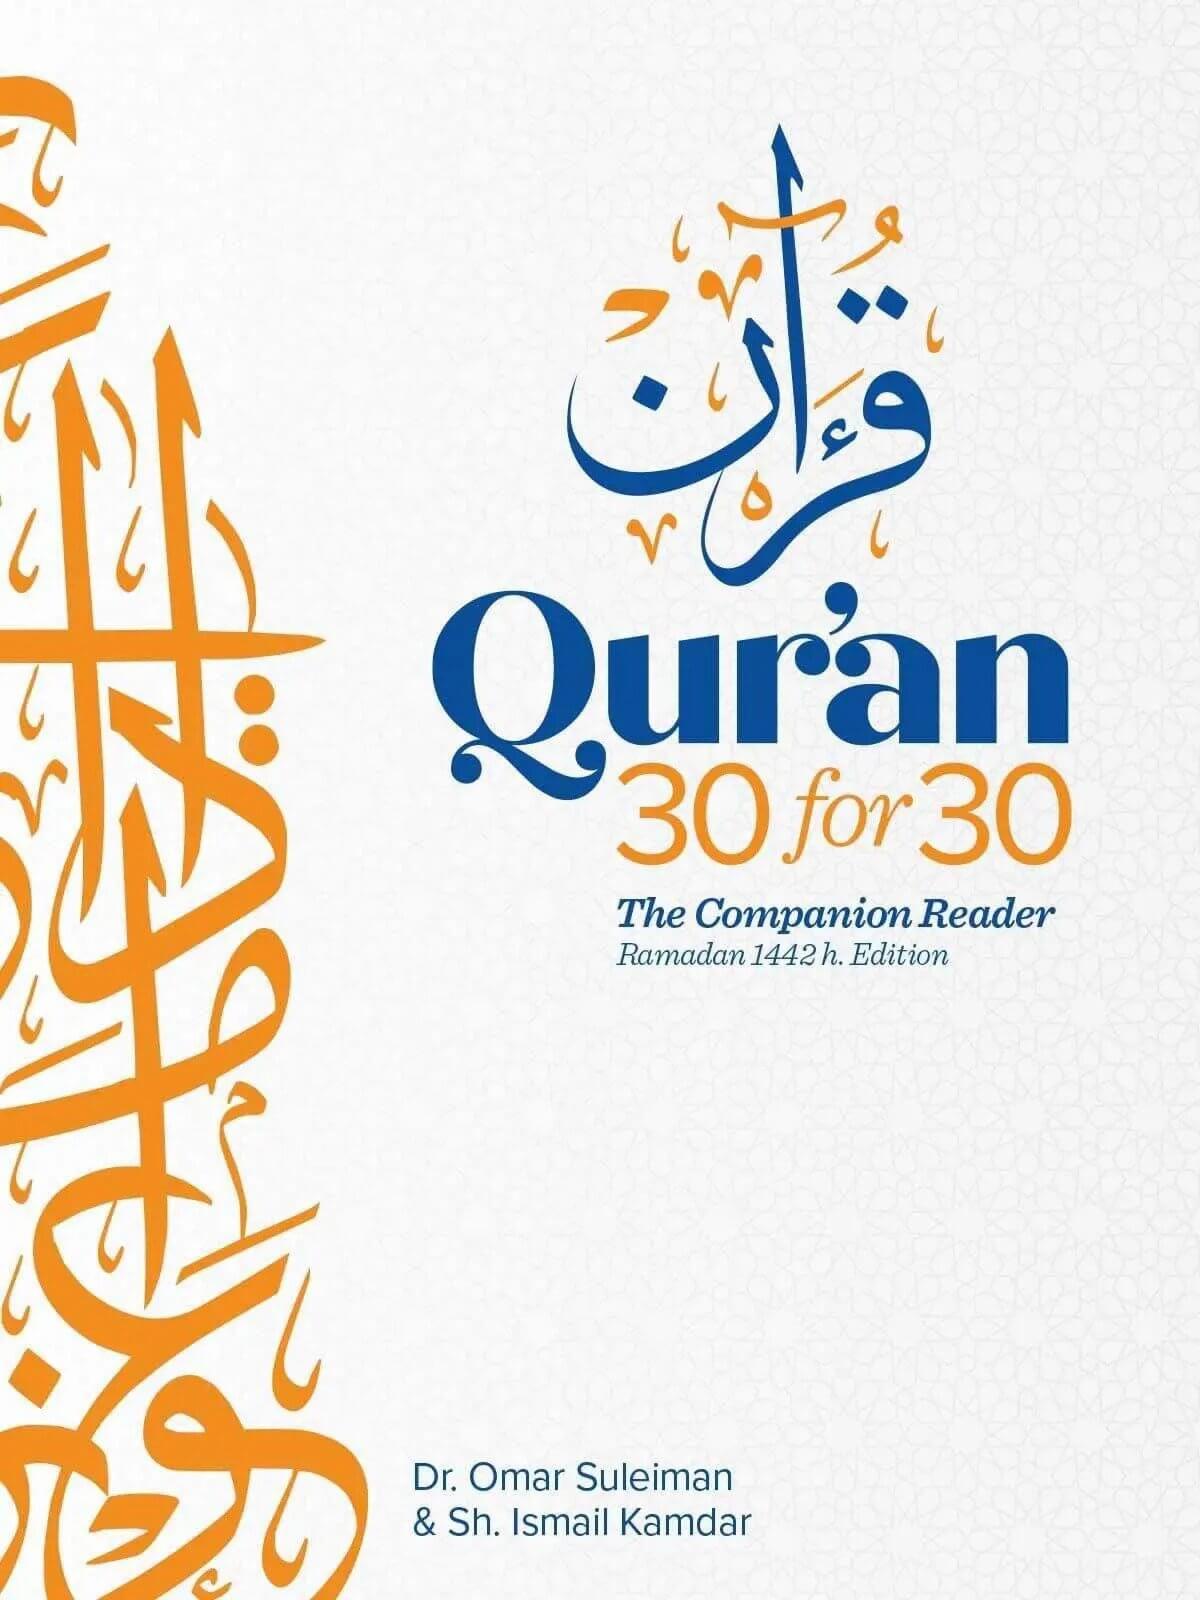 Quran 30 for 30 – The Companion Reader